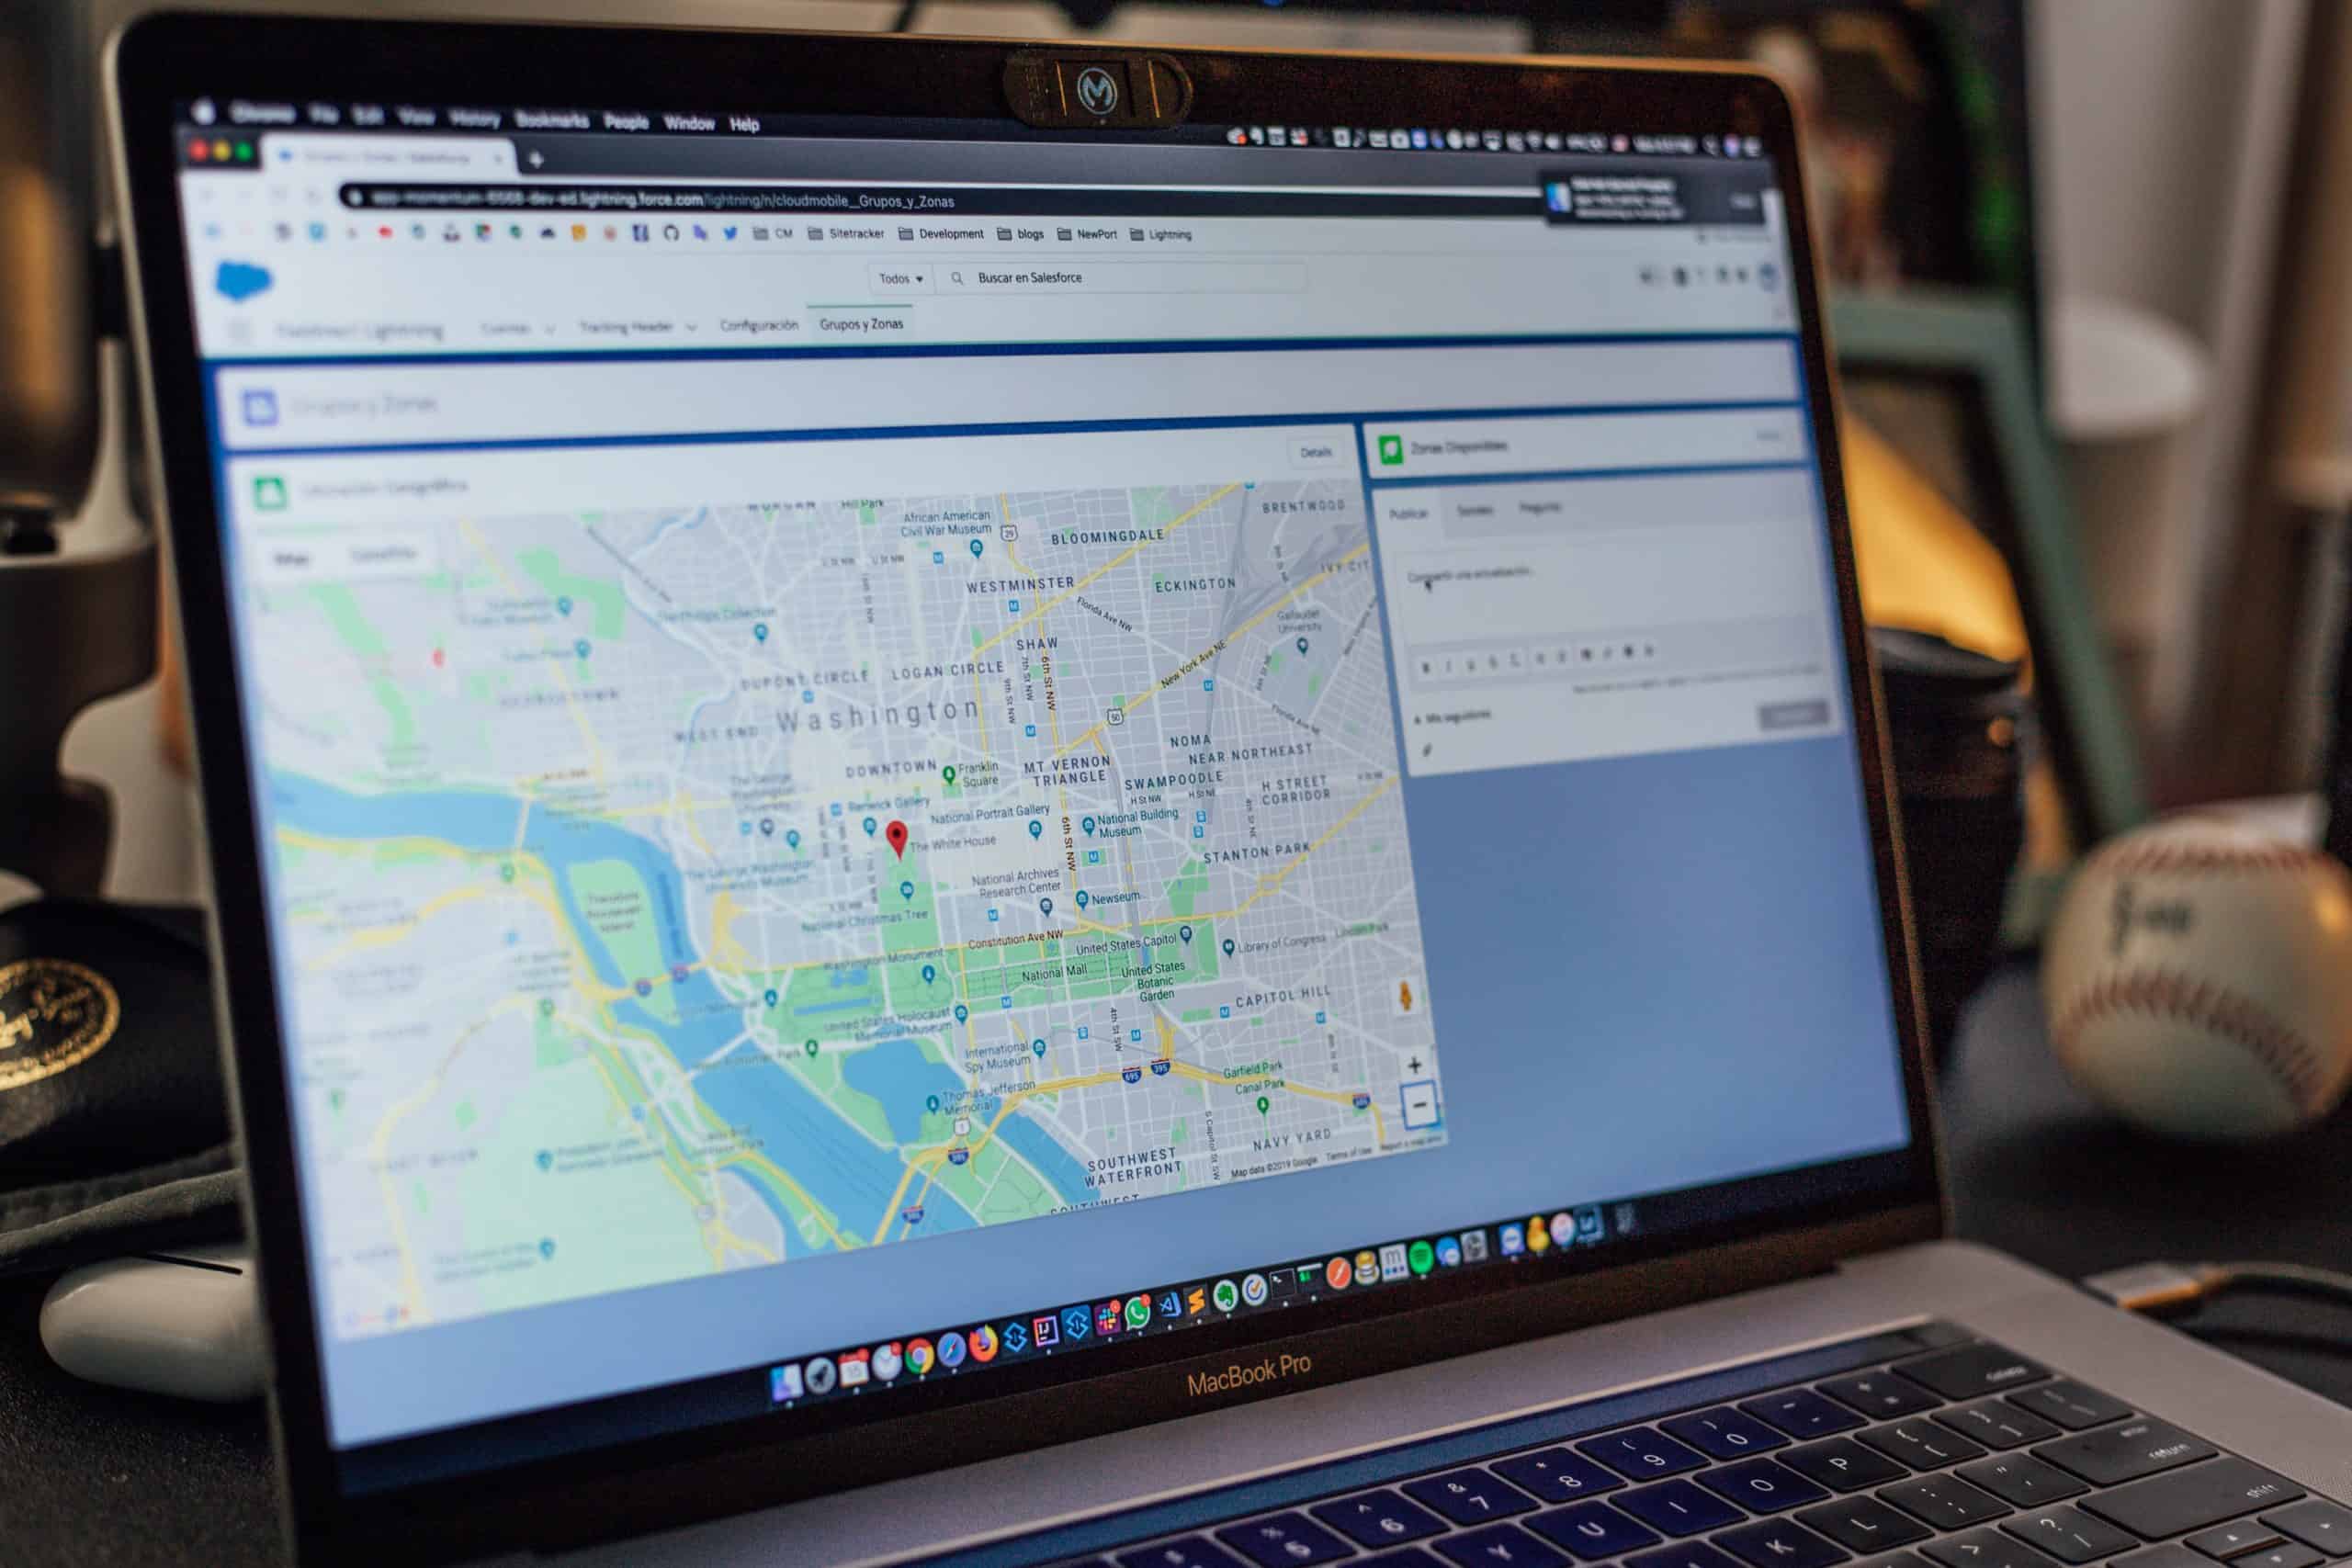 A laptop screen displaying a map of washington d.c. on a web-based mapping service.